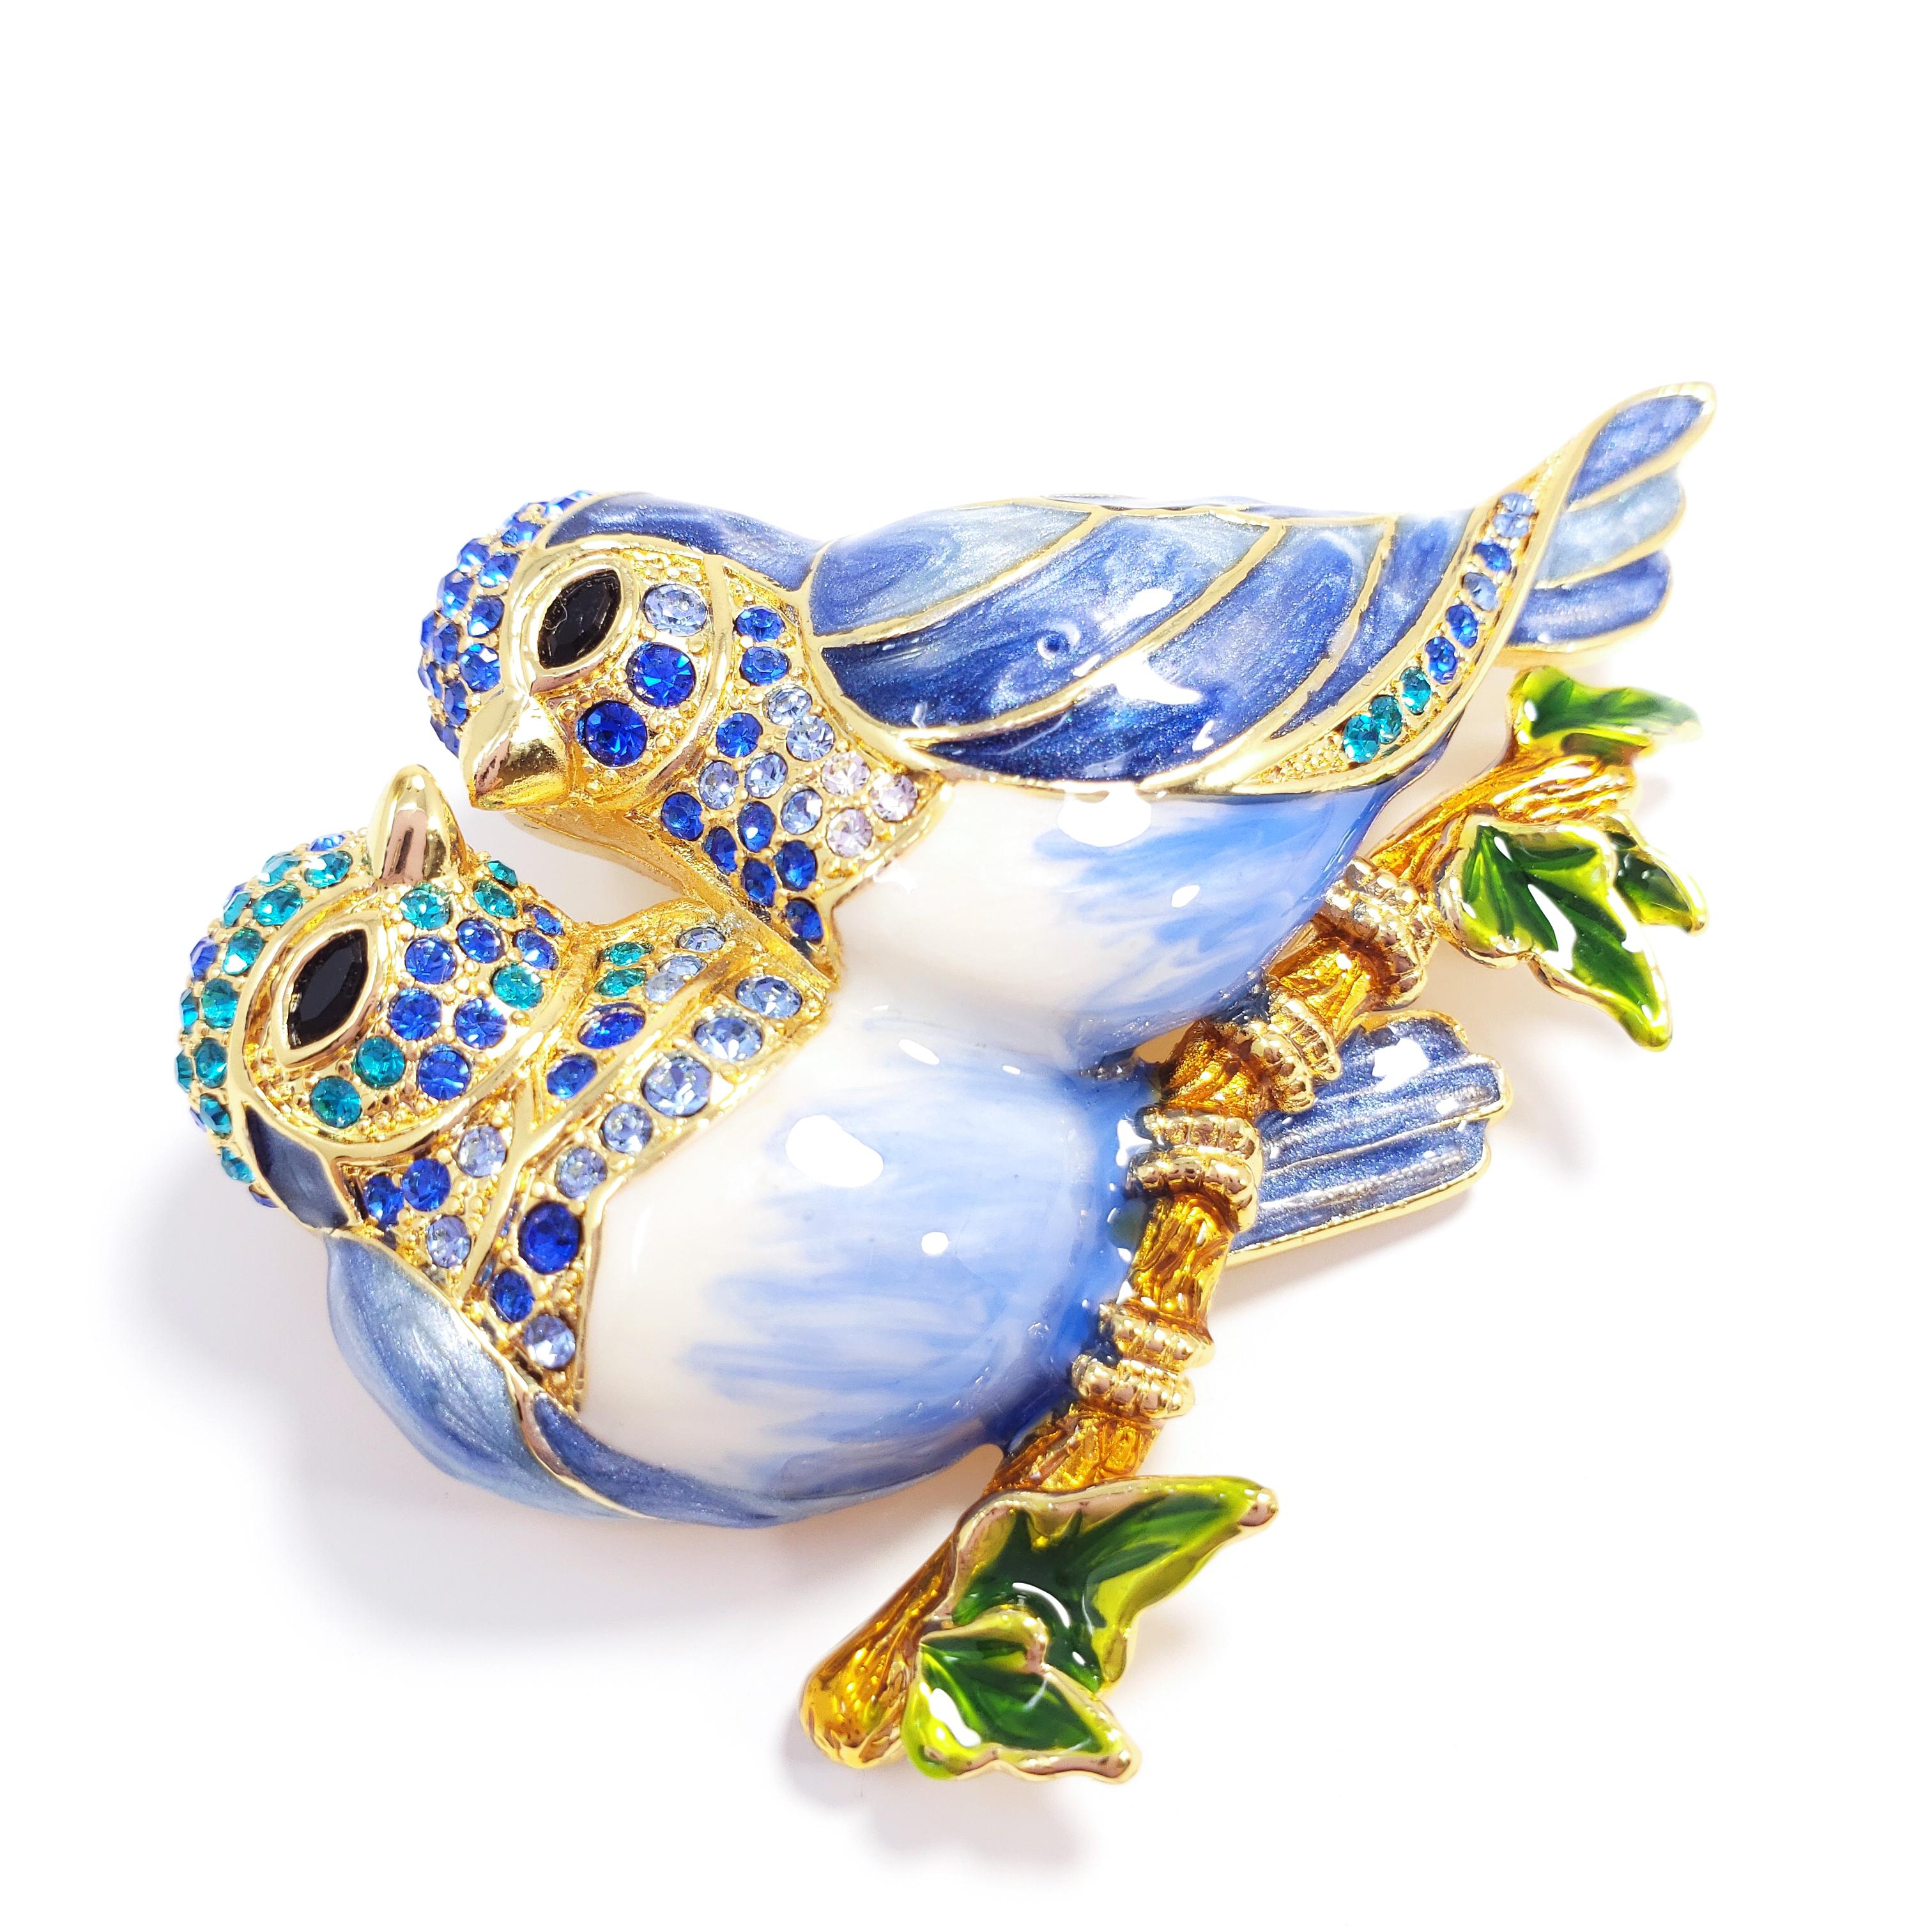 A vibrant pin / brooch / pendant featuring two lovebirds on a branch, painted in blue and white enamel, accented with Swarovski crystals. 

Hallmarks: Jay, Jay Strongwater, CN

By Jay Strongwater, originally for HSN. Sold out everywhere!